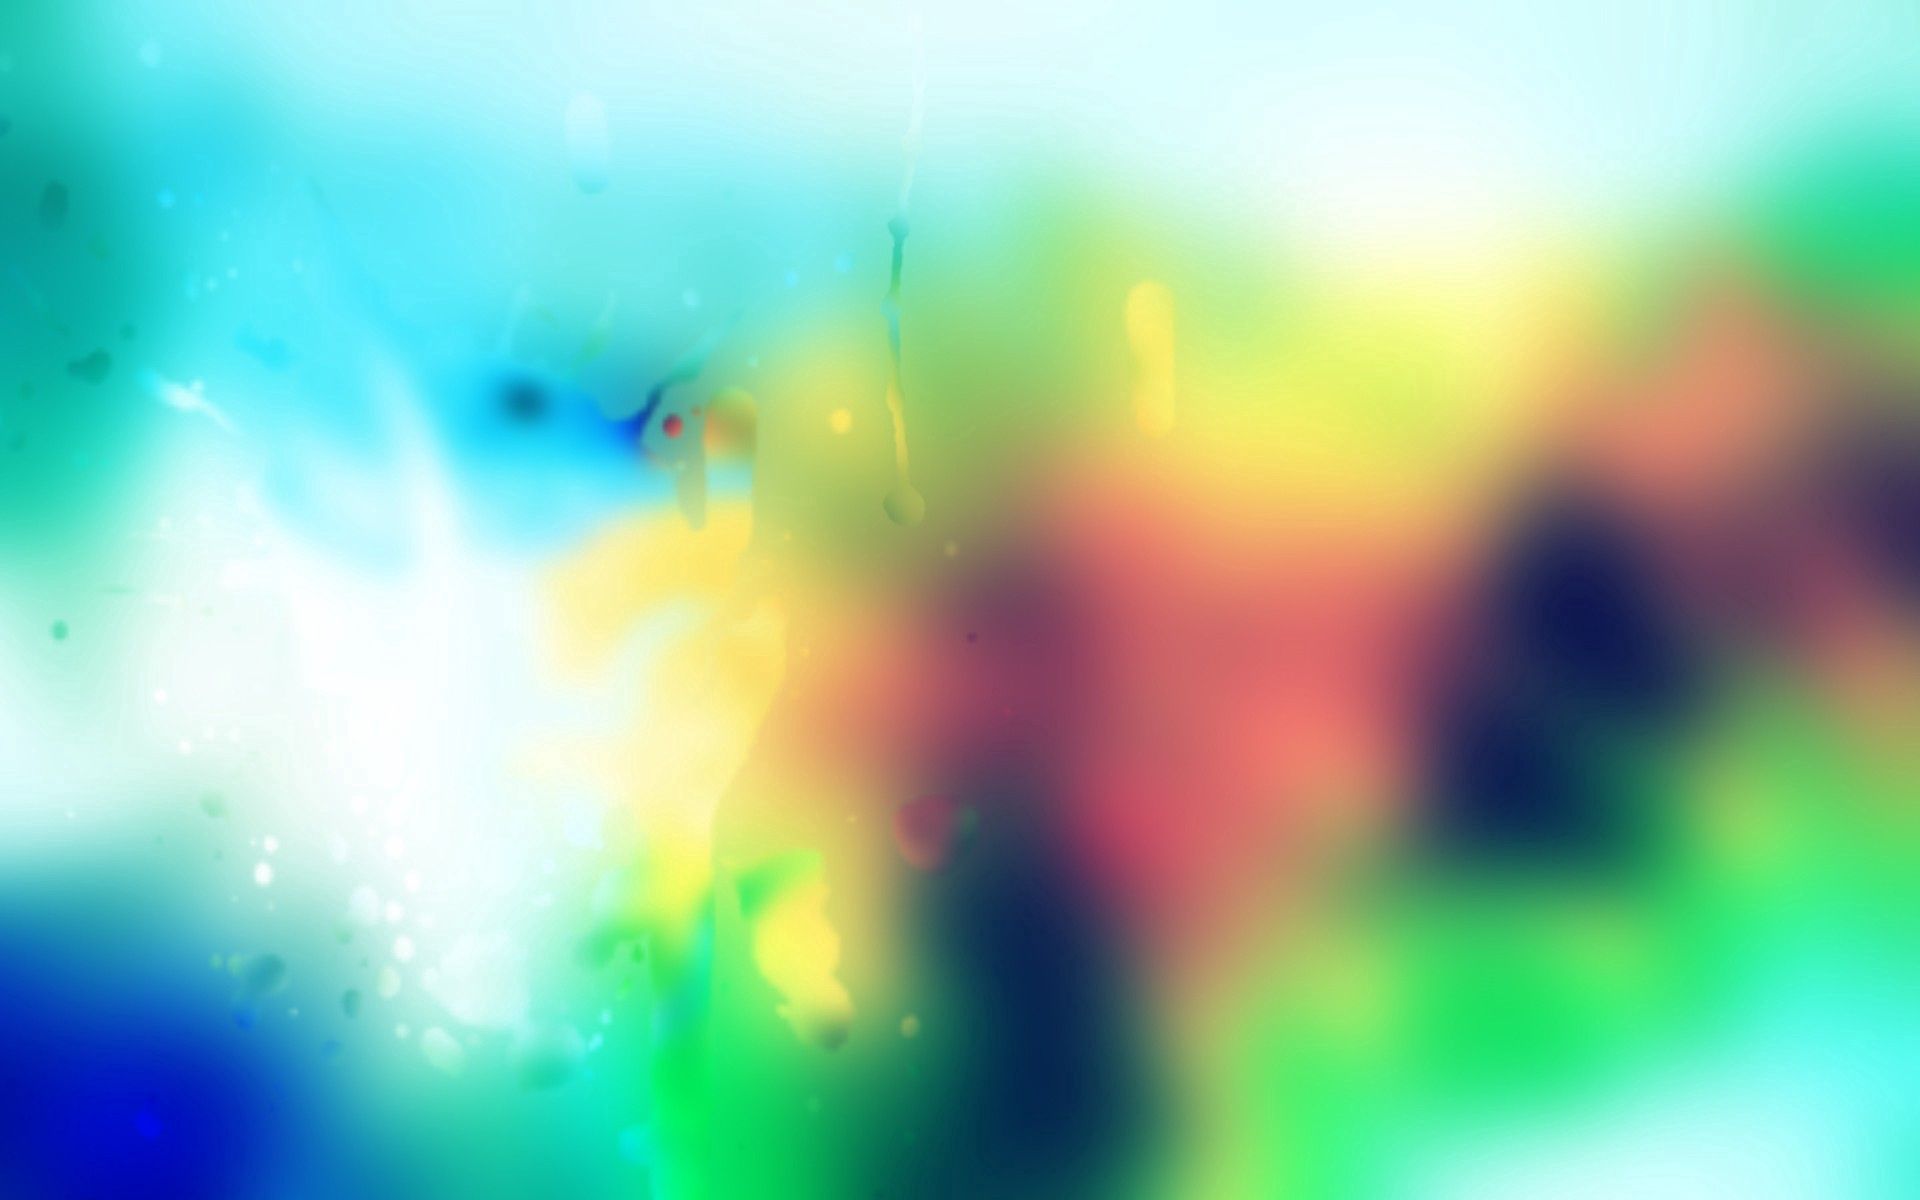 vertical wallpaper stains, colors, color, abstract, drops, blur, smooth, spots